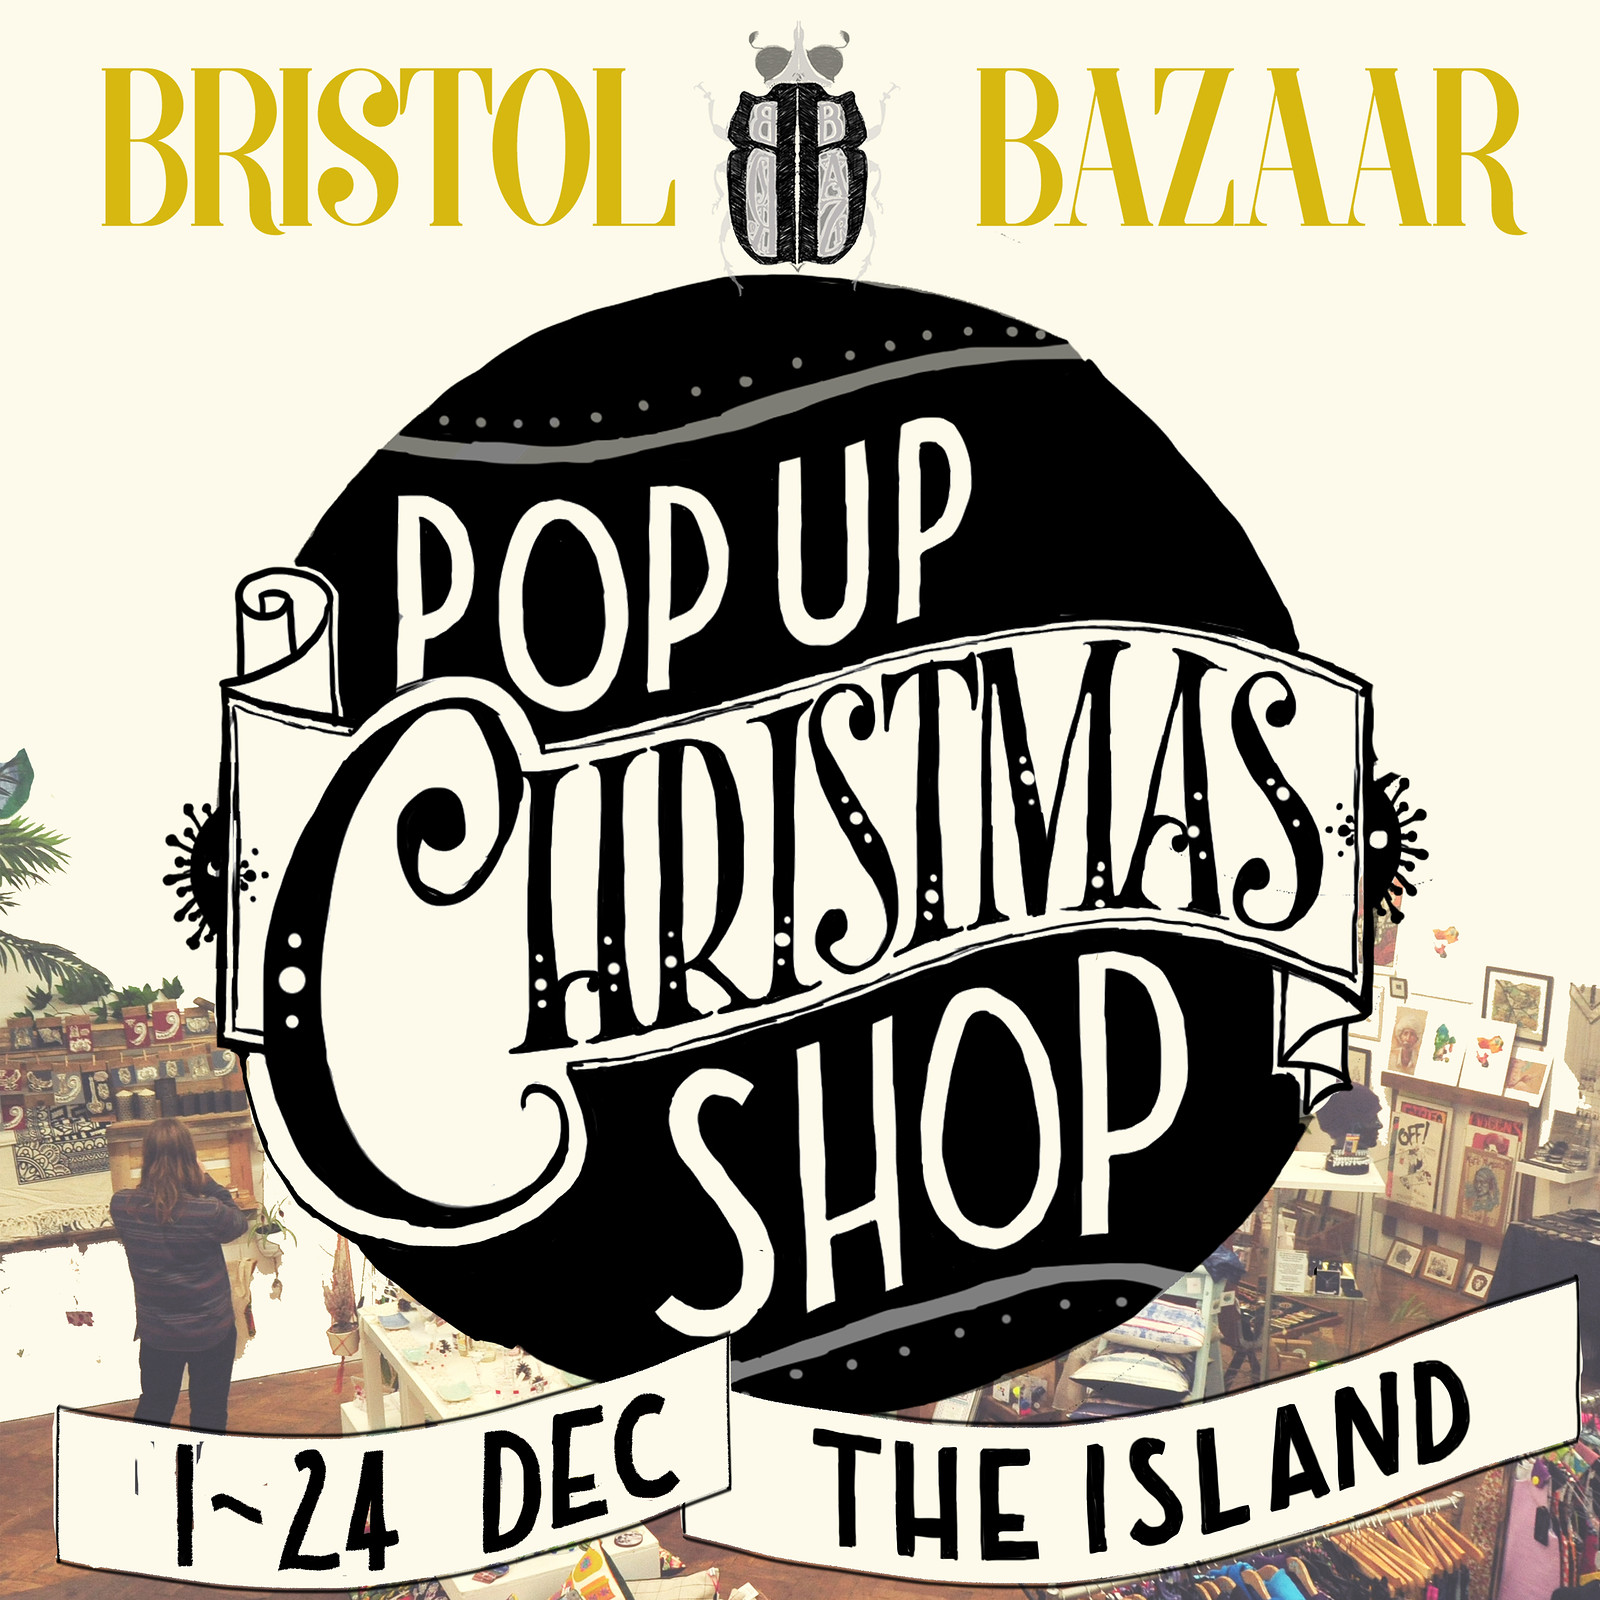 Bristol Bazaar Christmas Pop Up Shop Opening Party at The Island